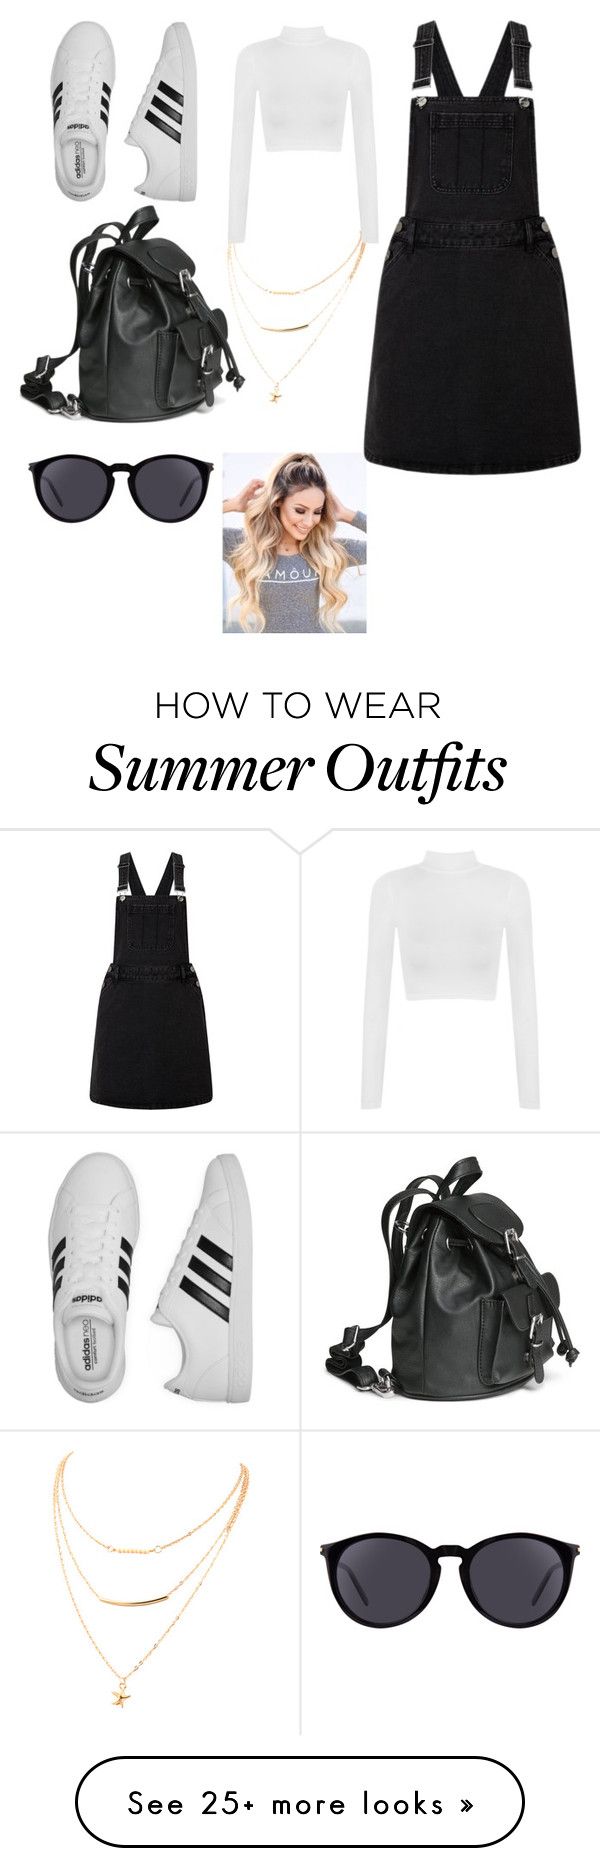 "Cute summer pinafore outfit" by chloe-jenkinson on Polyvore featuring...